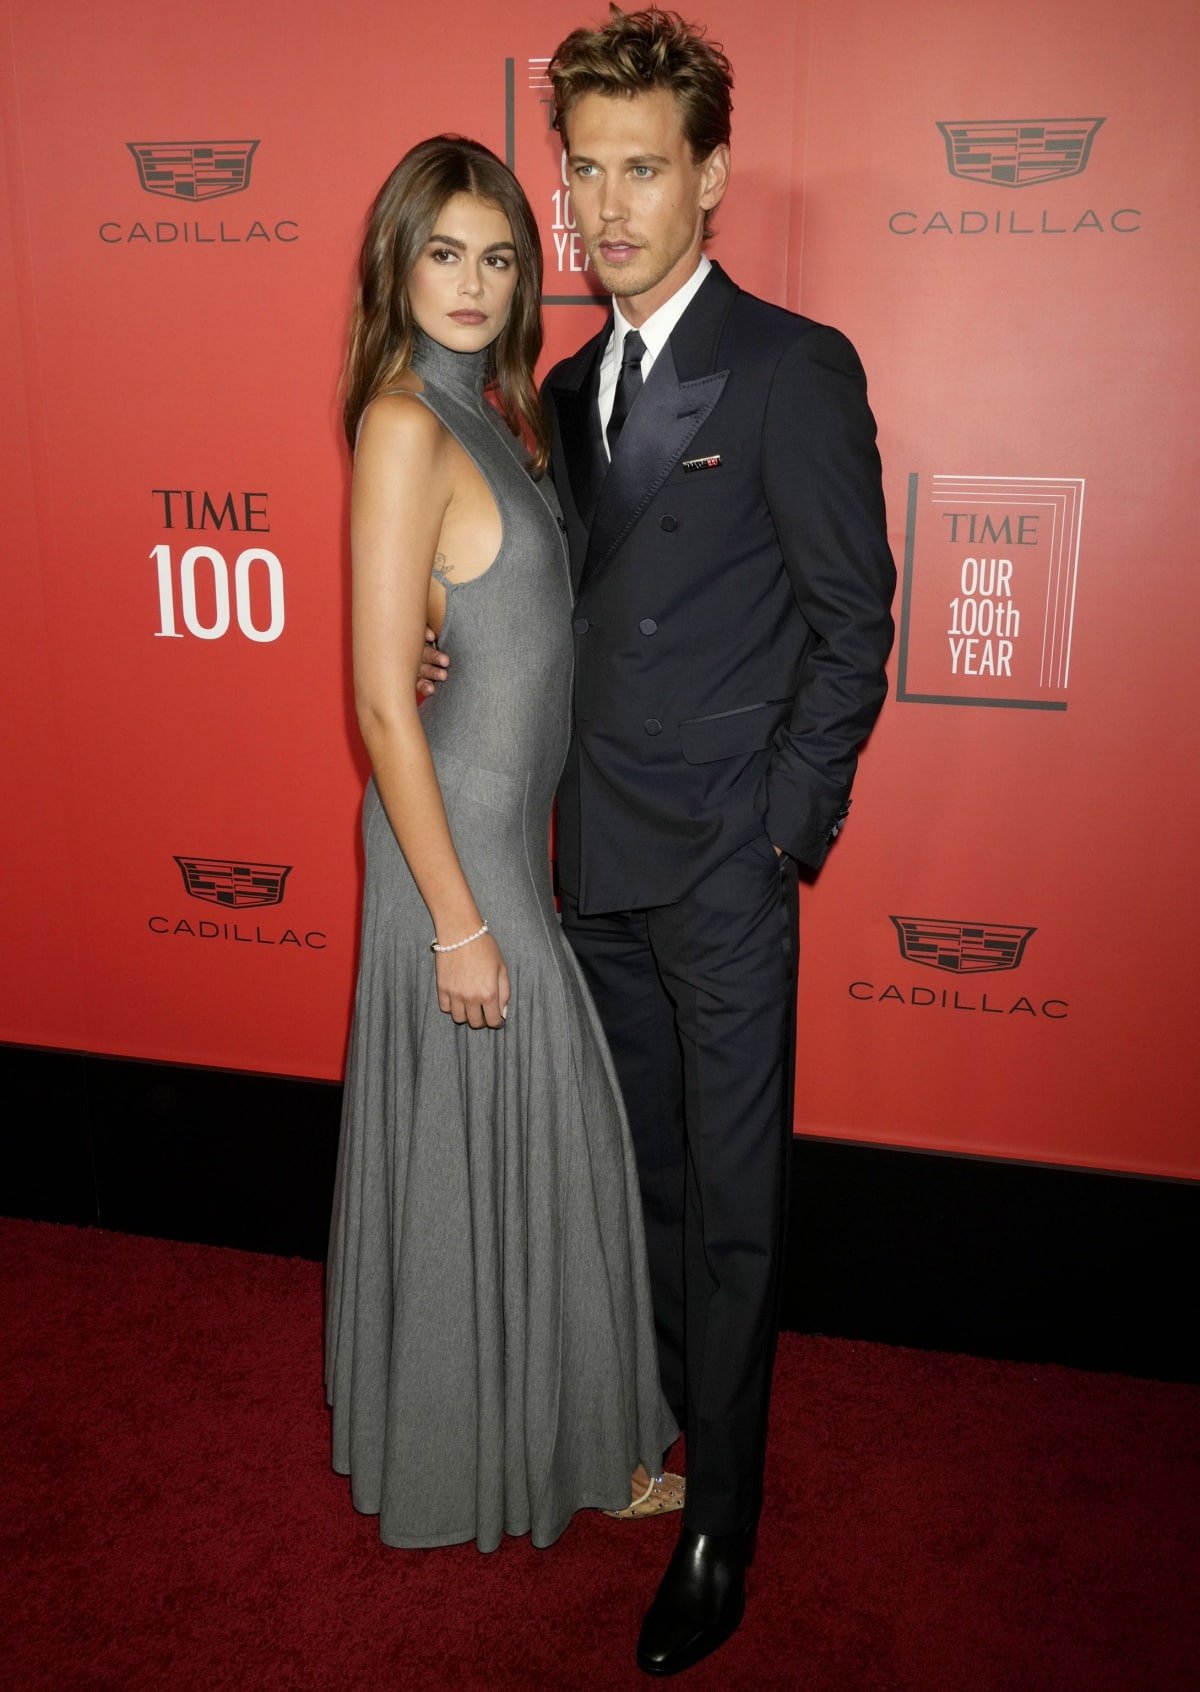 Kaia Gerber and Austin Butler attending the Time100 Gala, which celebrates the 100 most influential people of the year, in New York City